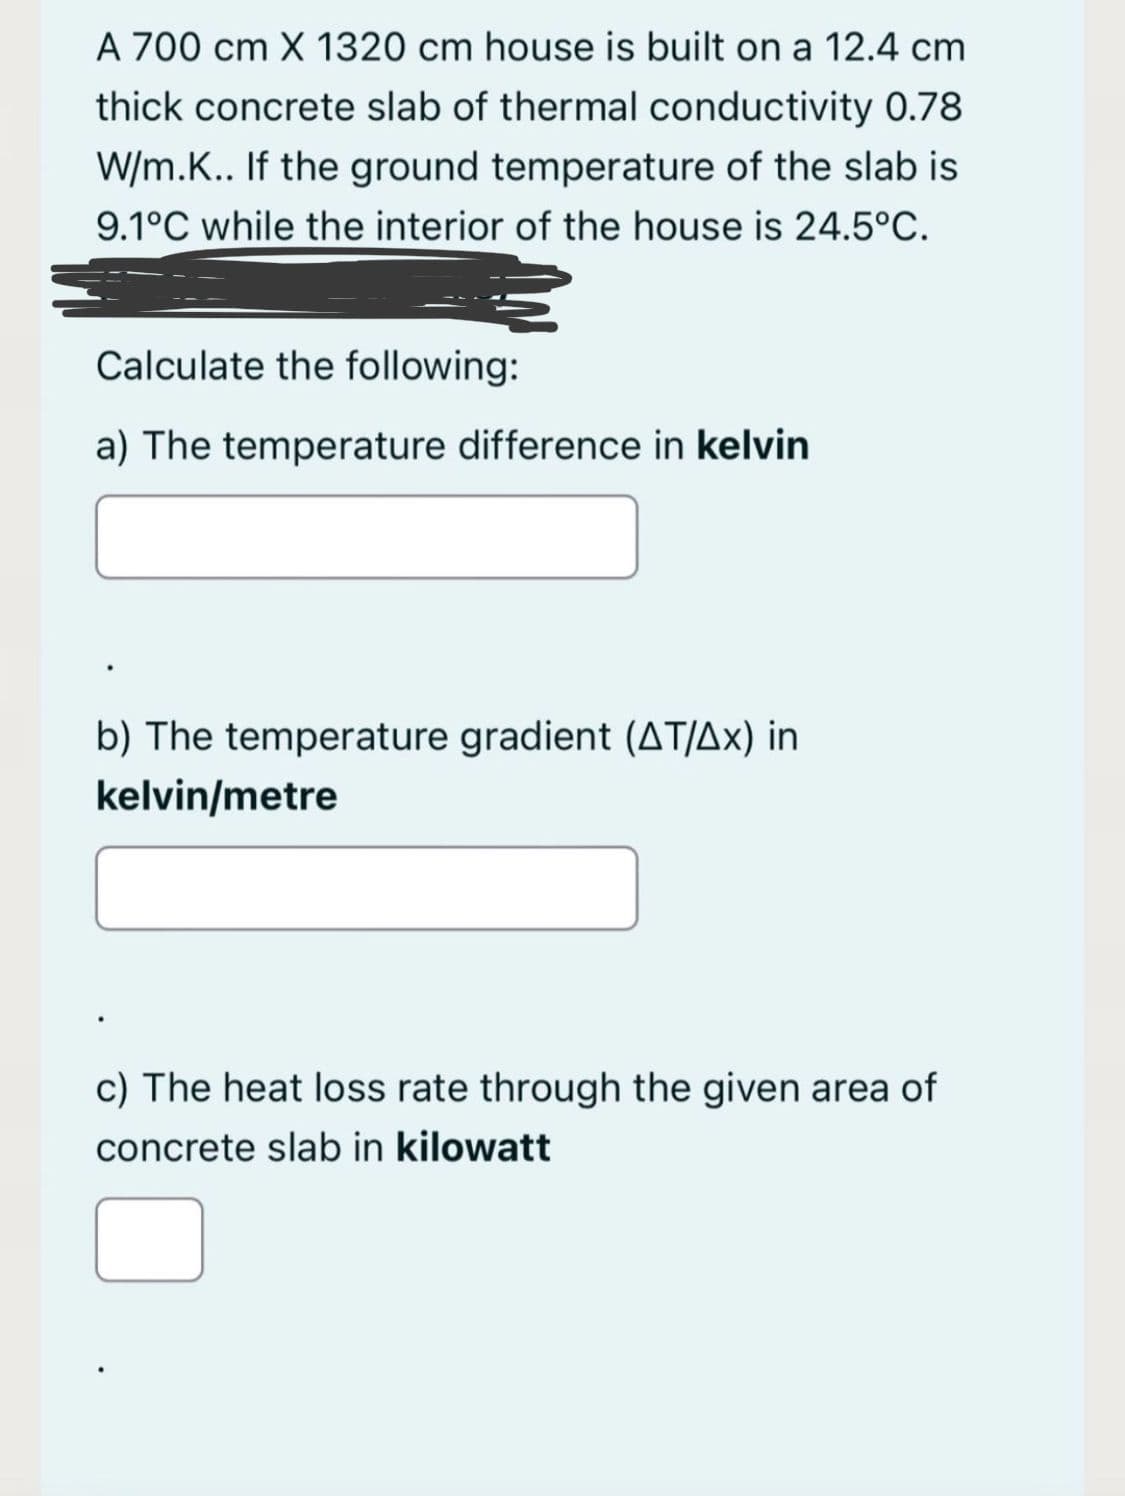 A 700 cm X 1320 cm house is built on a 12.4 cm
thick concrete slab of thermal conductivity 0.78
W/m.K.. If the ground temperature of the slab is
9.1°C while the interior of the house is 24.5°C.
Calculate the following:
a) The temperature difference in kelvin
b) The temperature gradient (AT/Ax) in
kelvin/metre
c) The heat loss rate through the given area of
concrete slab in kilowatt
